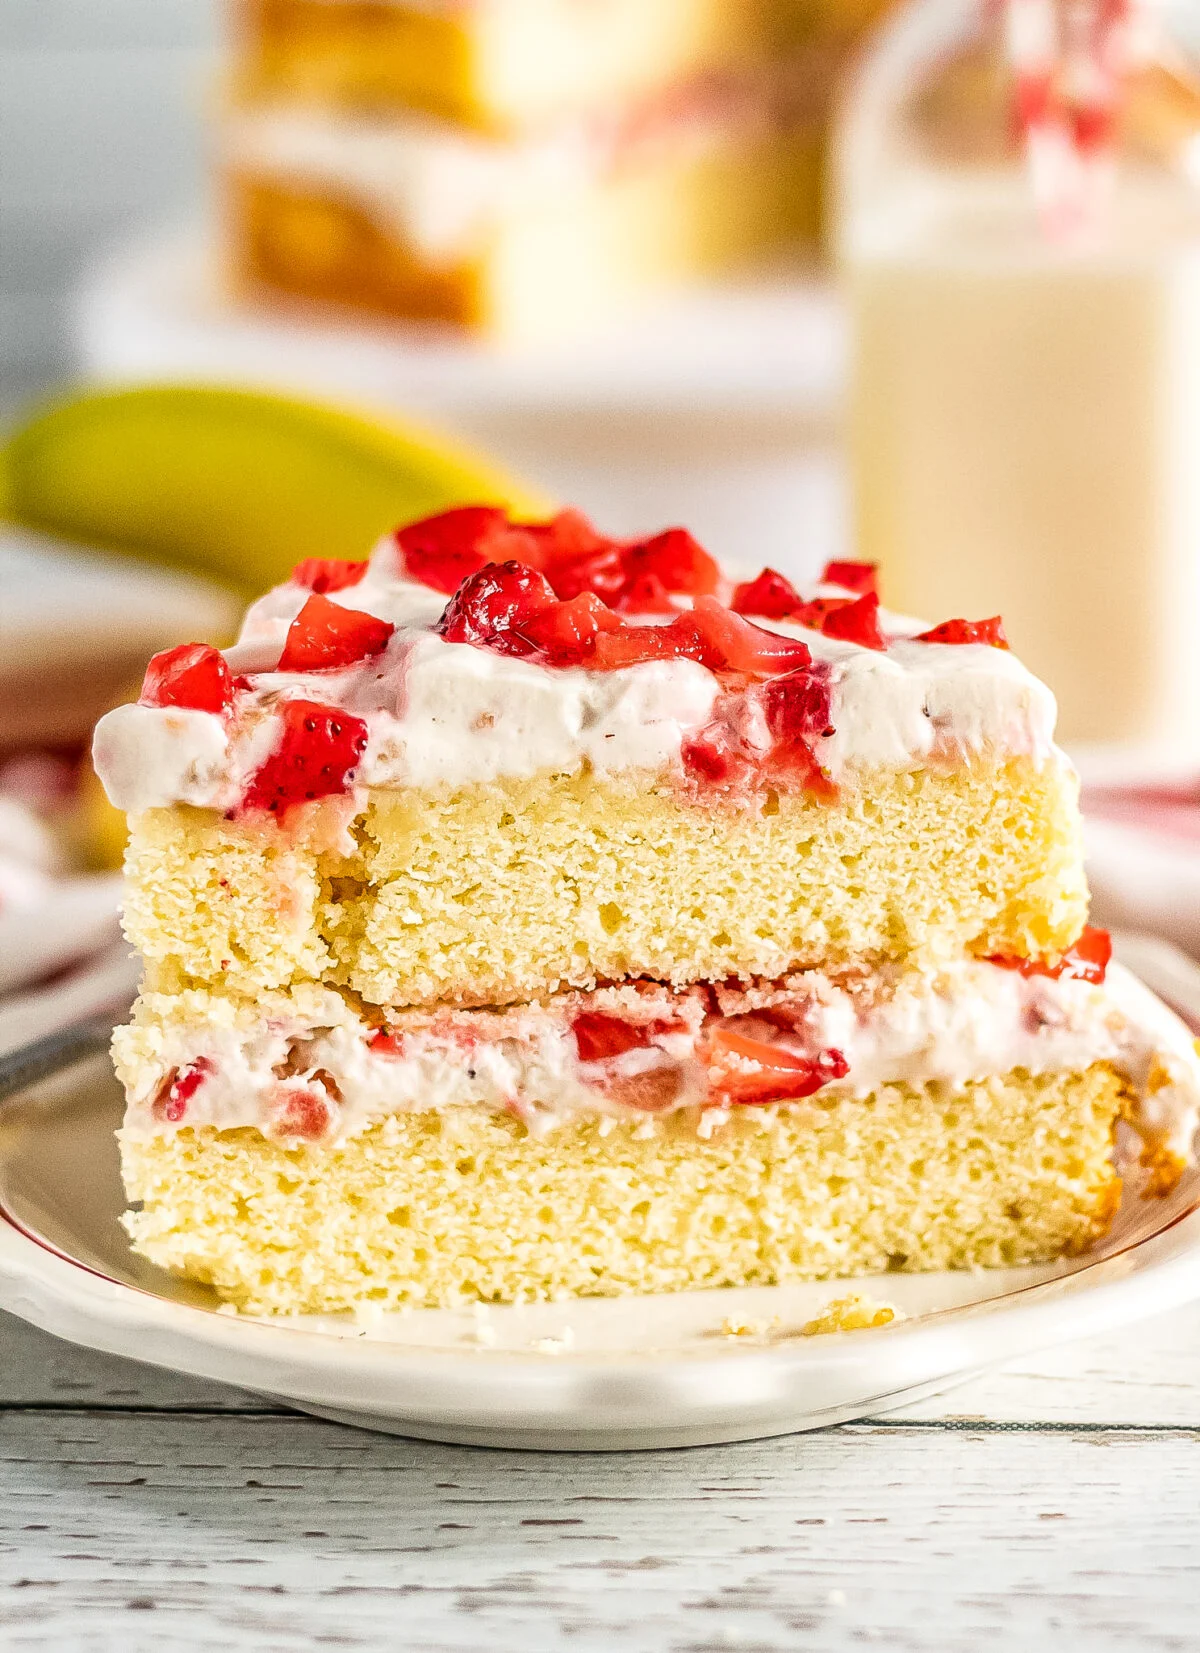 An, easy recipe for a strawberry banana layer cake with layers of creamy whipped cream frosting made with fresh bananas and strawberries.